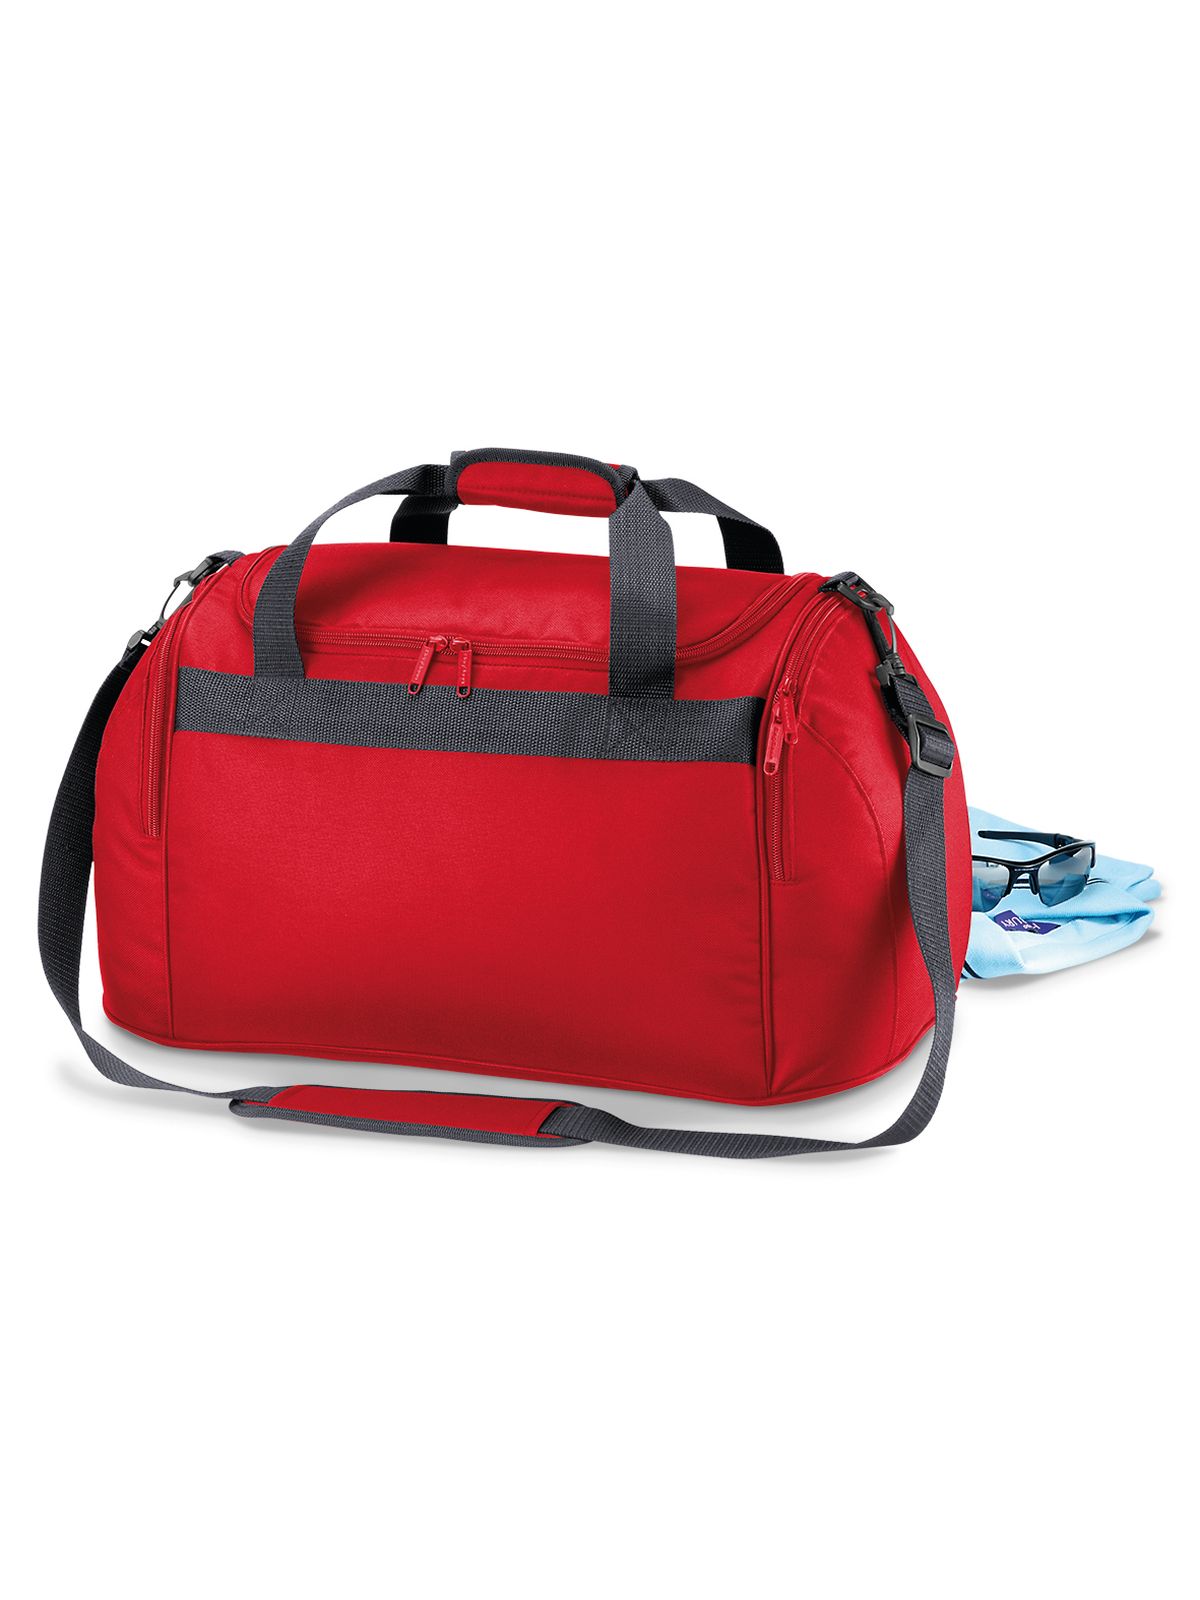 freestyle-holdall-classic-red.webp